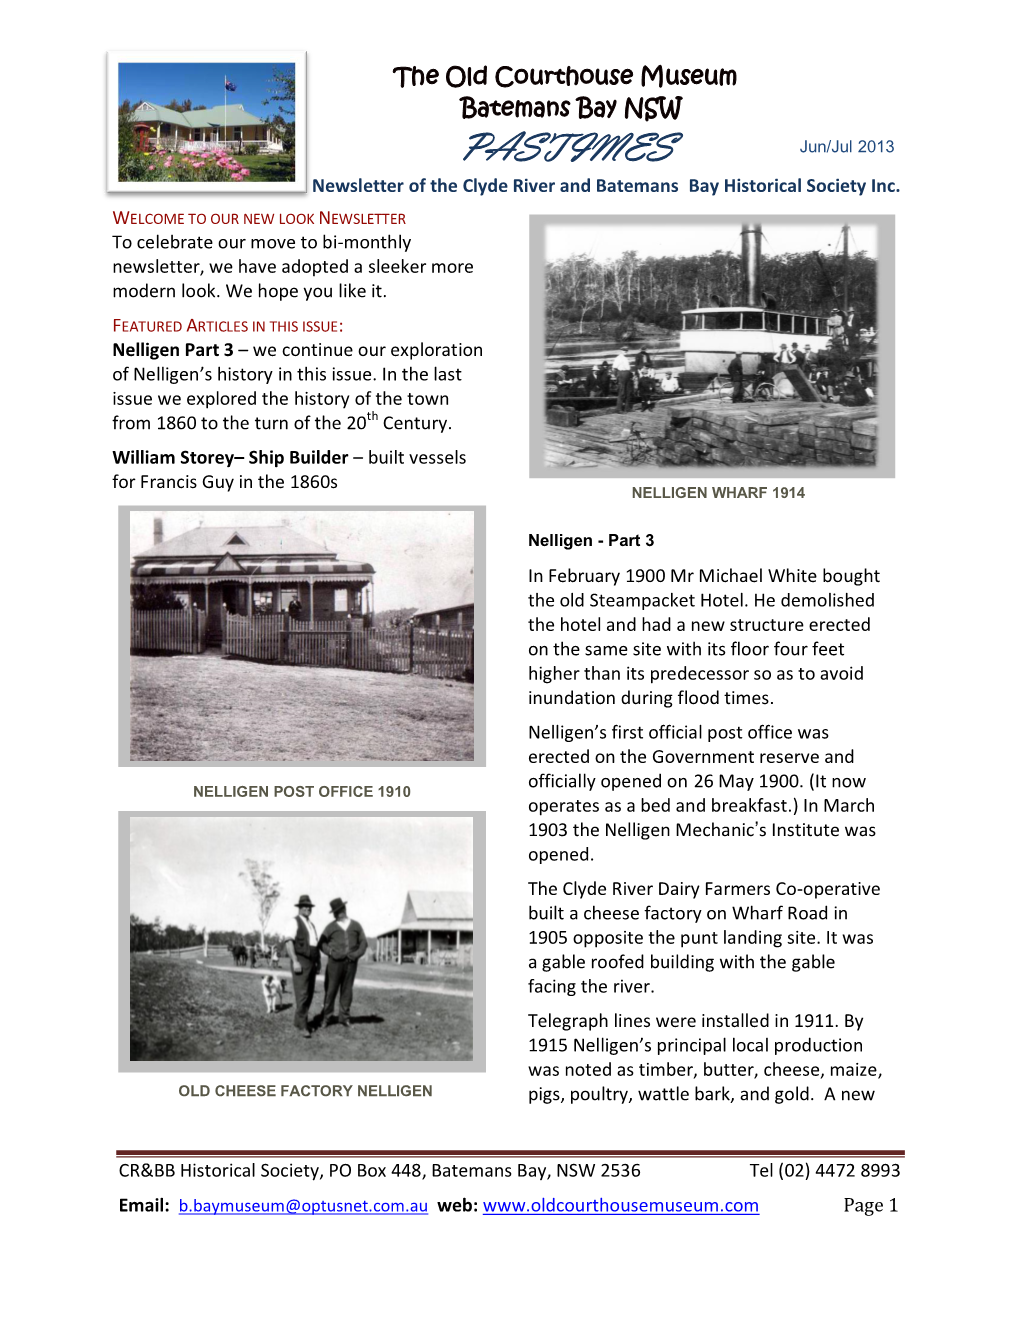 PASTIMES Jun/Jul 2013 Newsletter of the Clyde River and Batemans Bay Historical Society Inc